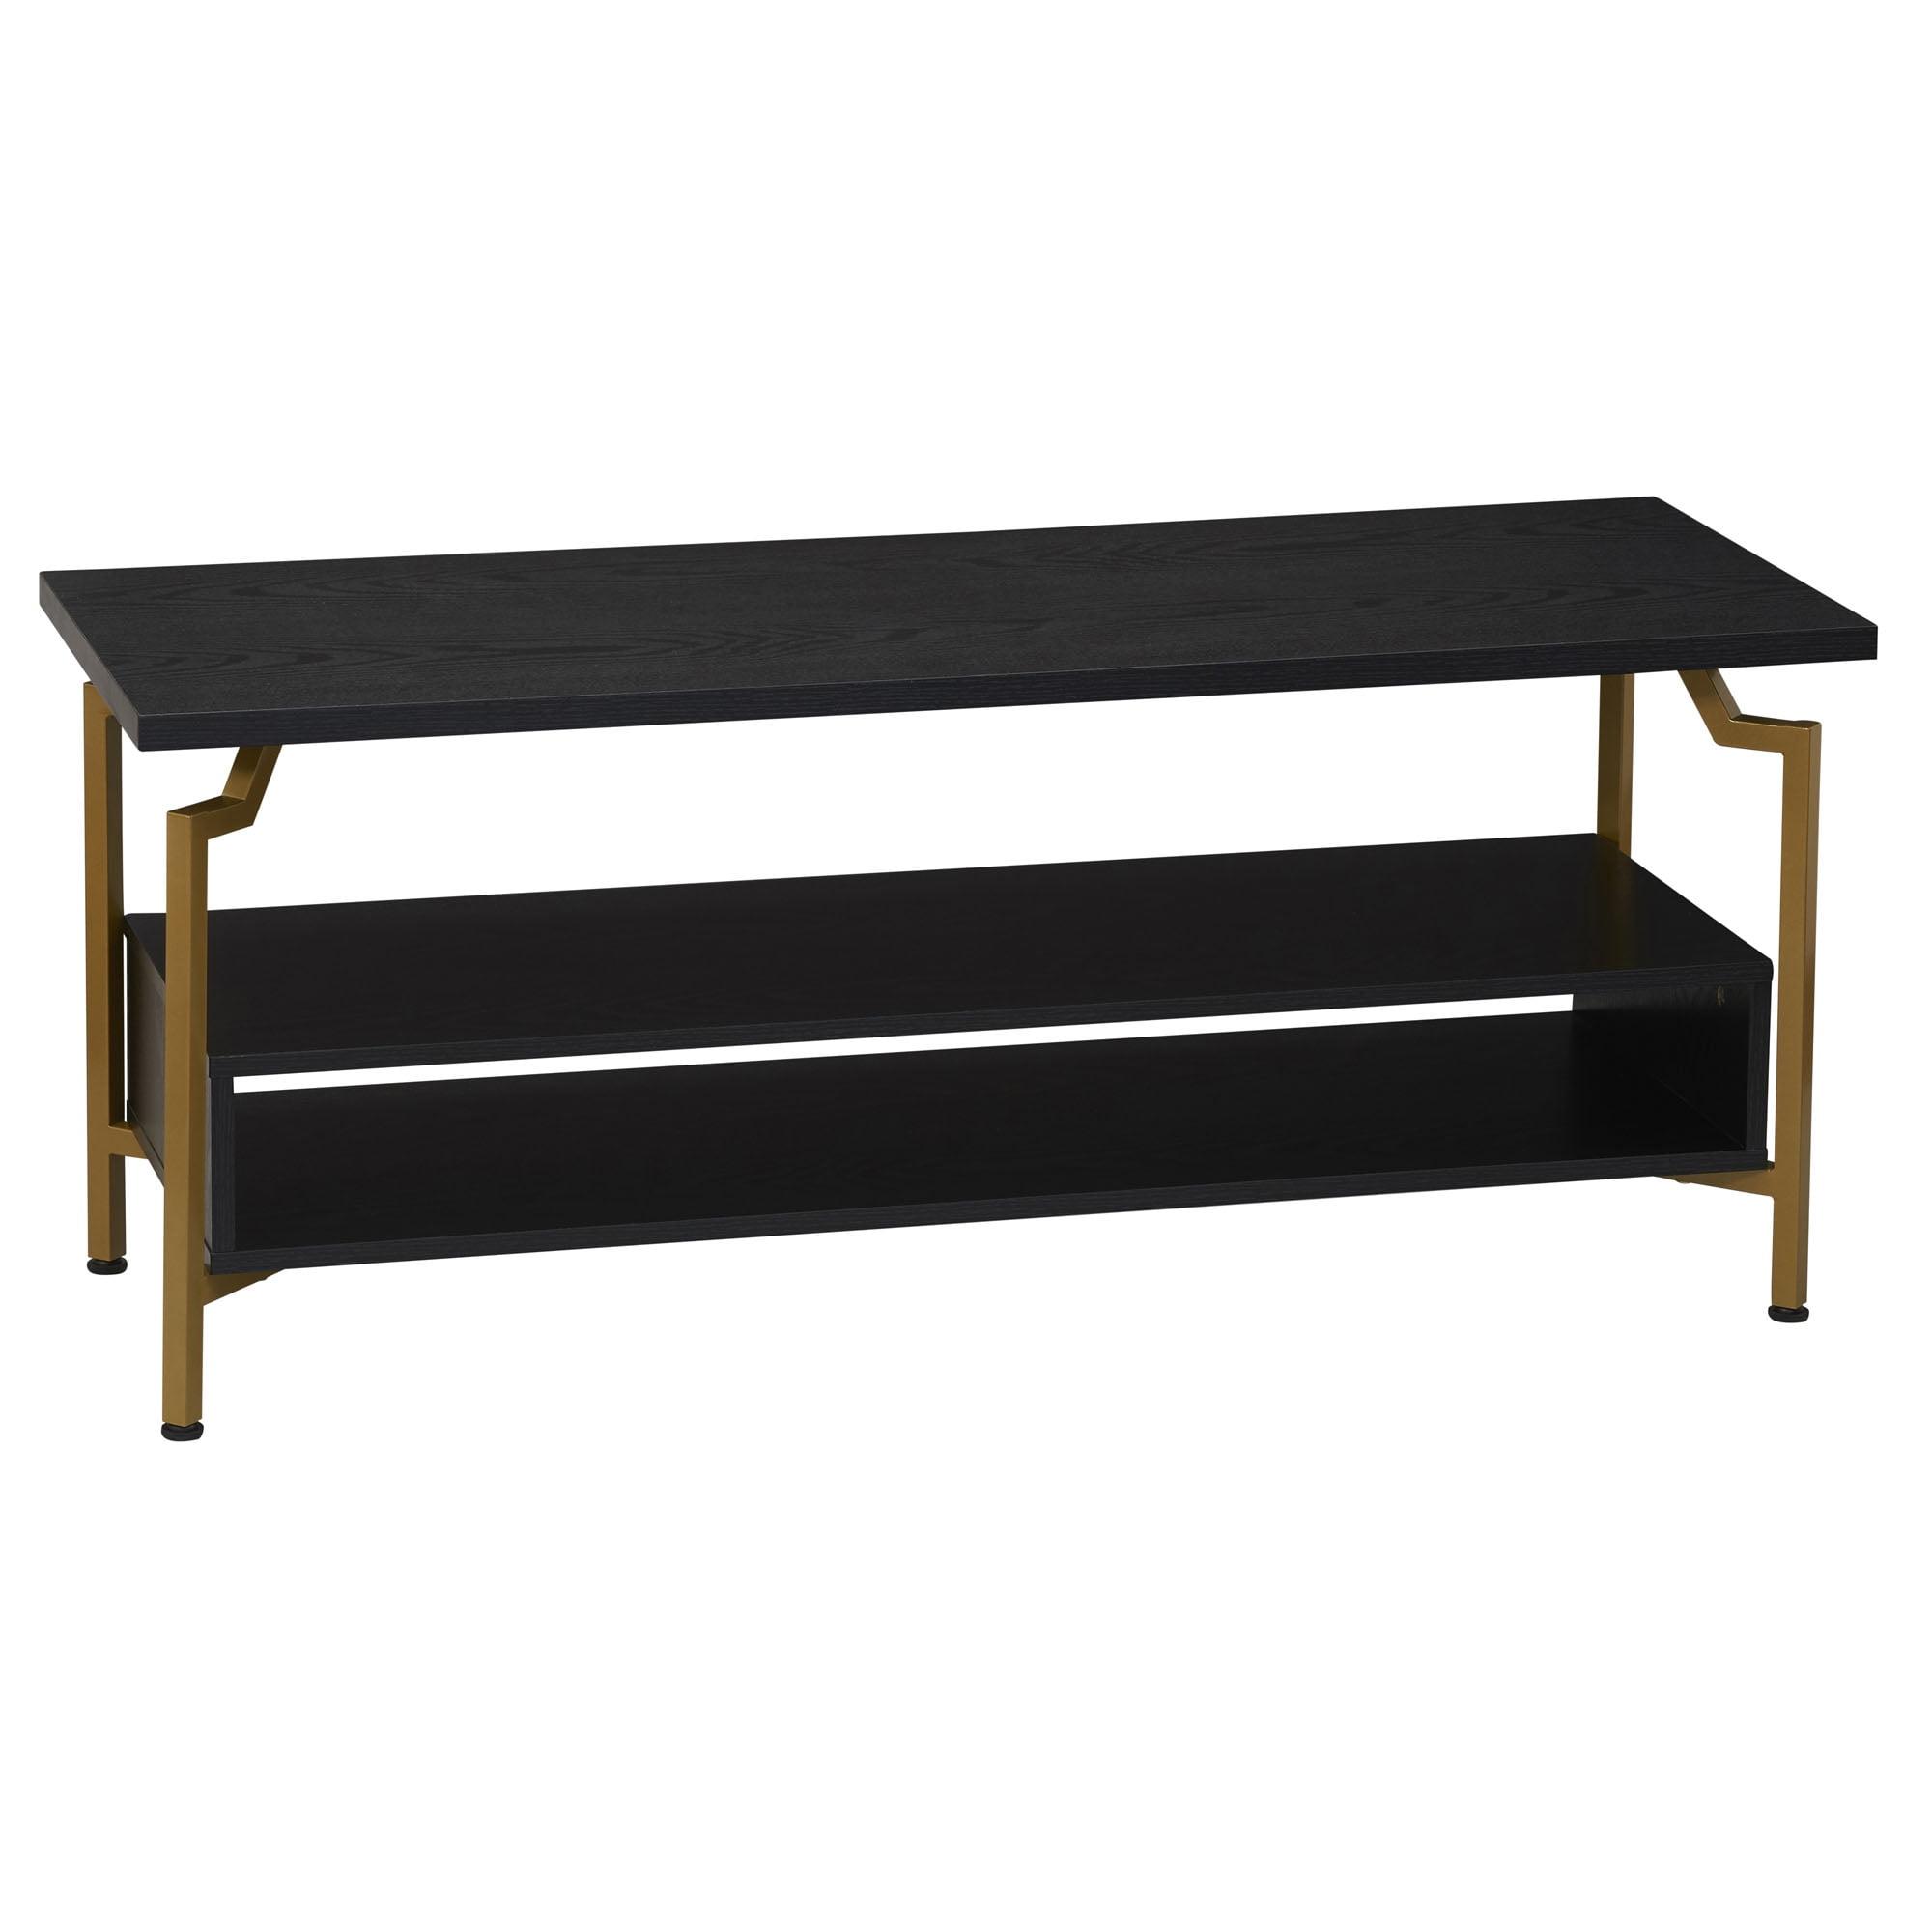 Black Oak and Gold Multi-Tier TV Stand with Storage